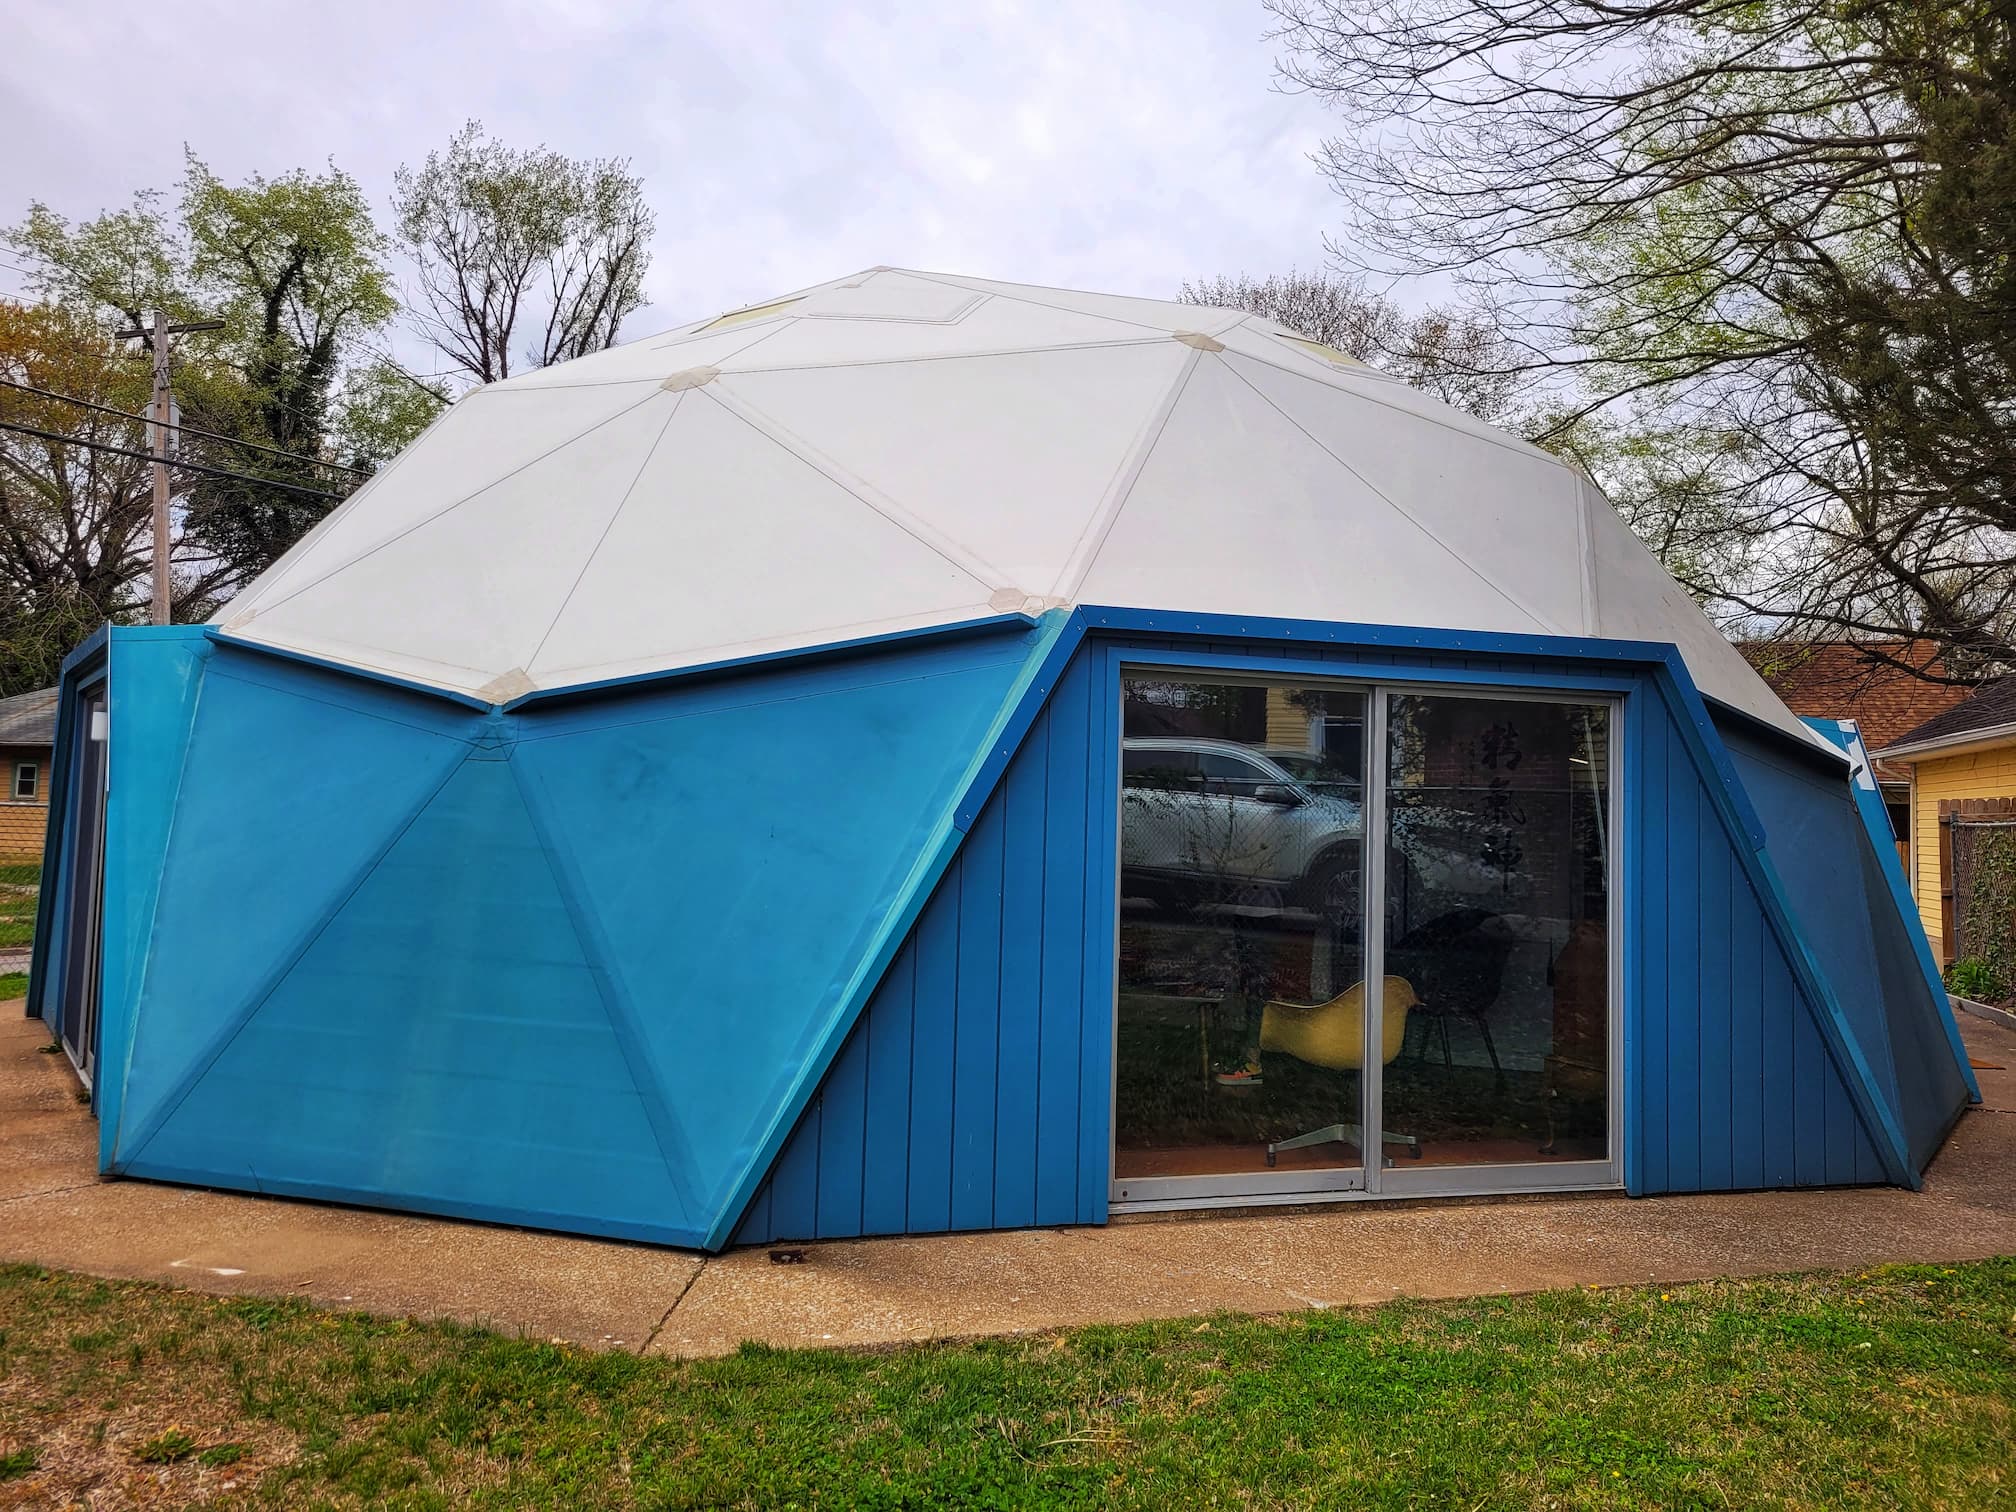 Visiting the Bucky Dome Home Museum: A Geodesic Wonder